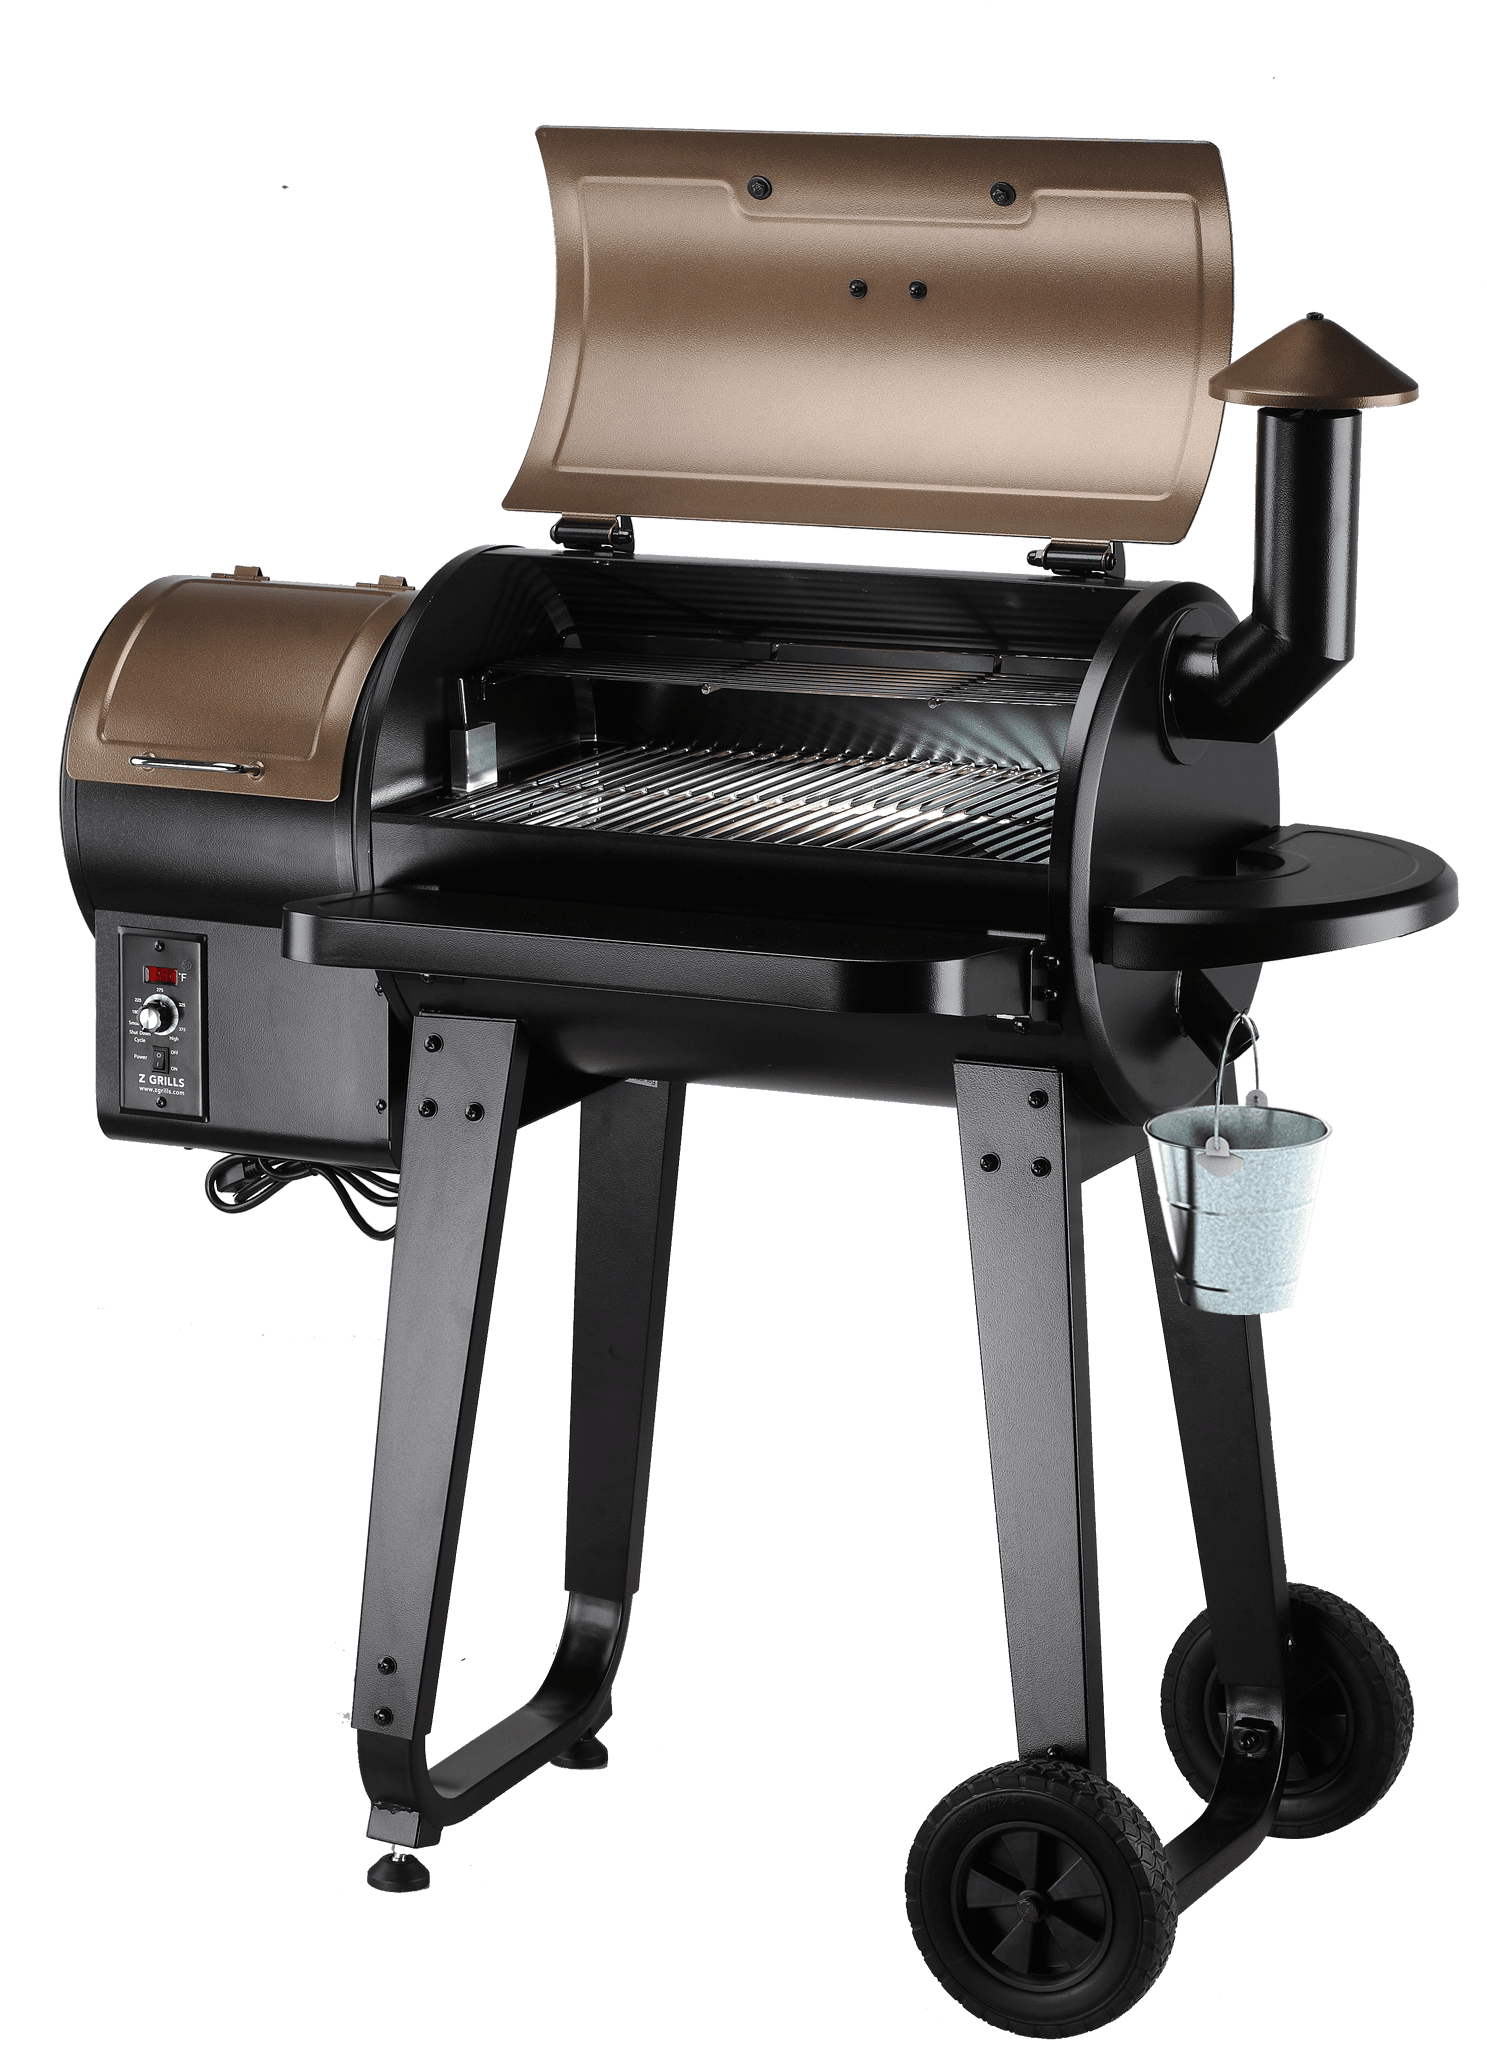 Z Grills Zpg 450a Wood Pellet Barbecue Grill And Smoker With Digital Temperature Controls Perfect Family Size Backyard Bbq Grill Walmart Com Walmart Com